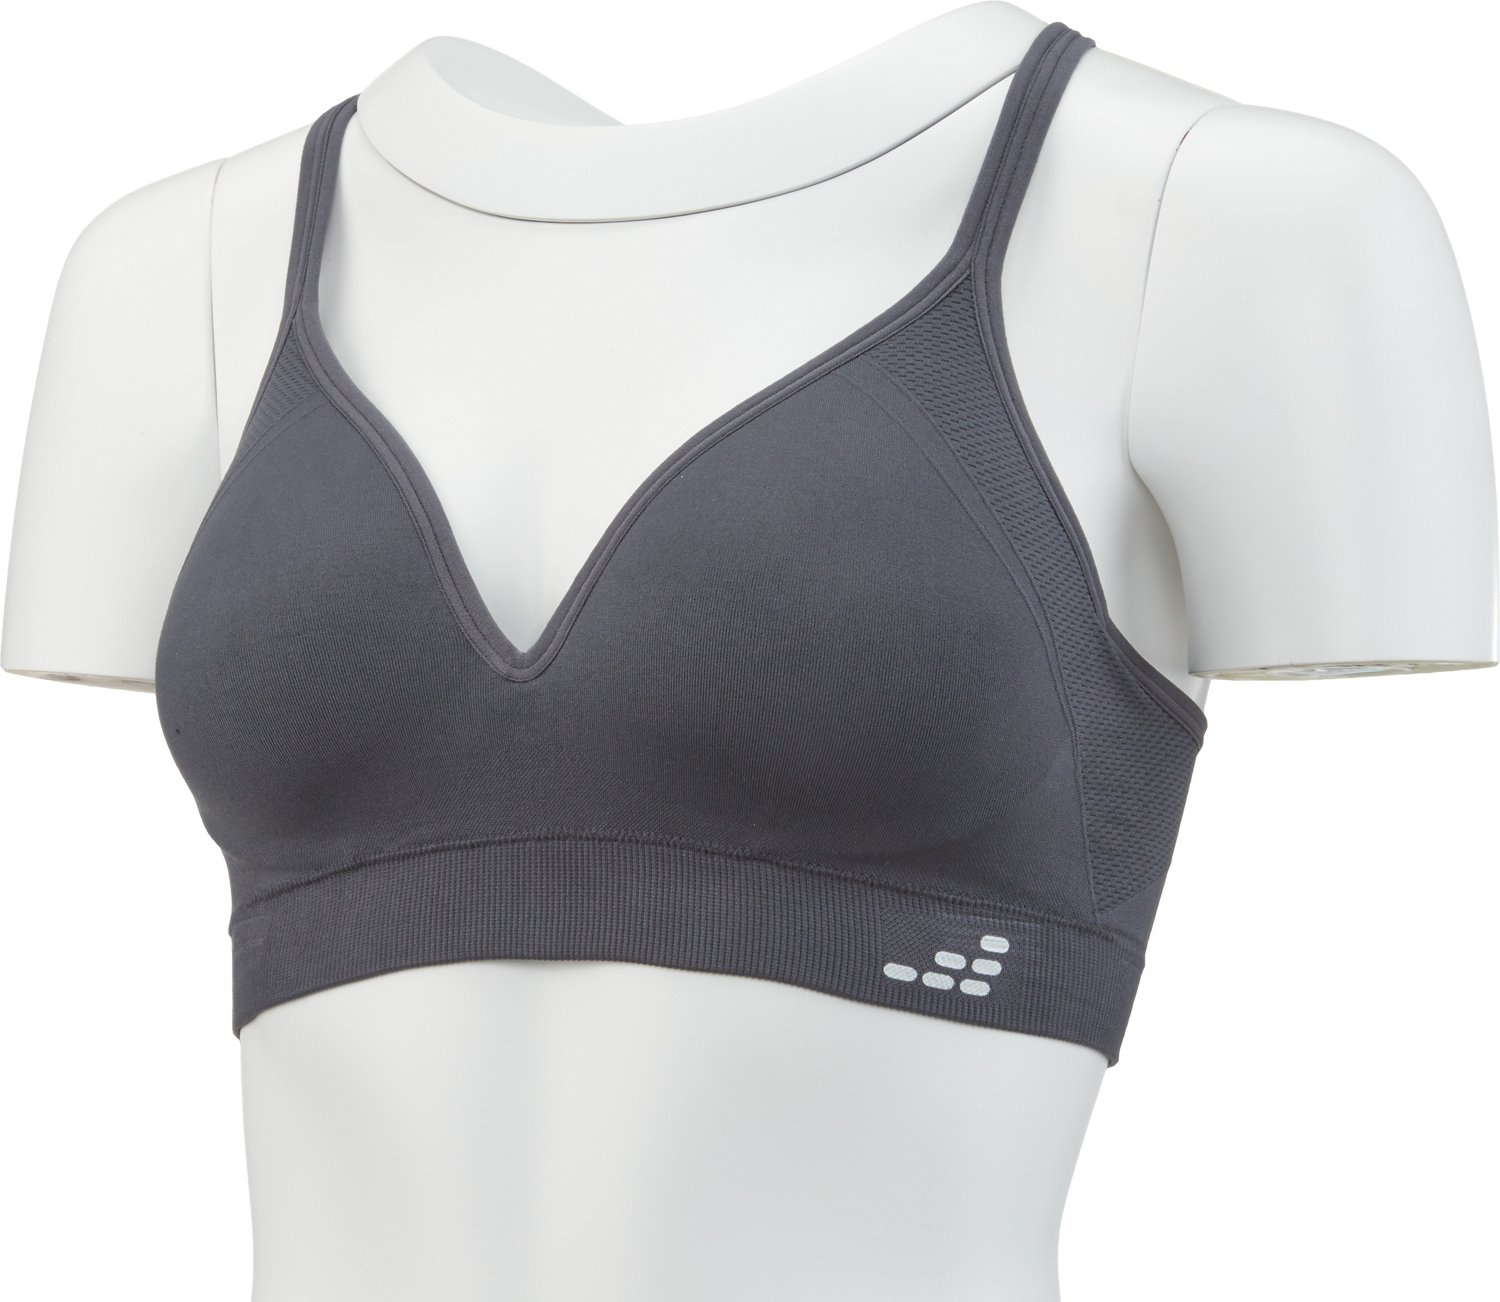 Women's Activewear Mid Impact Molded Cup Sports Bra